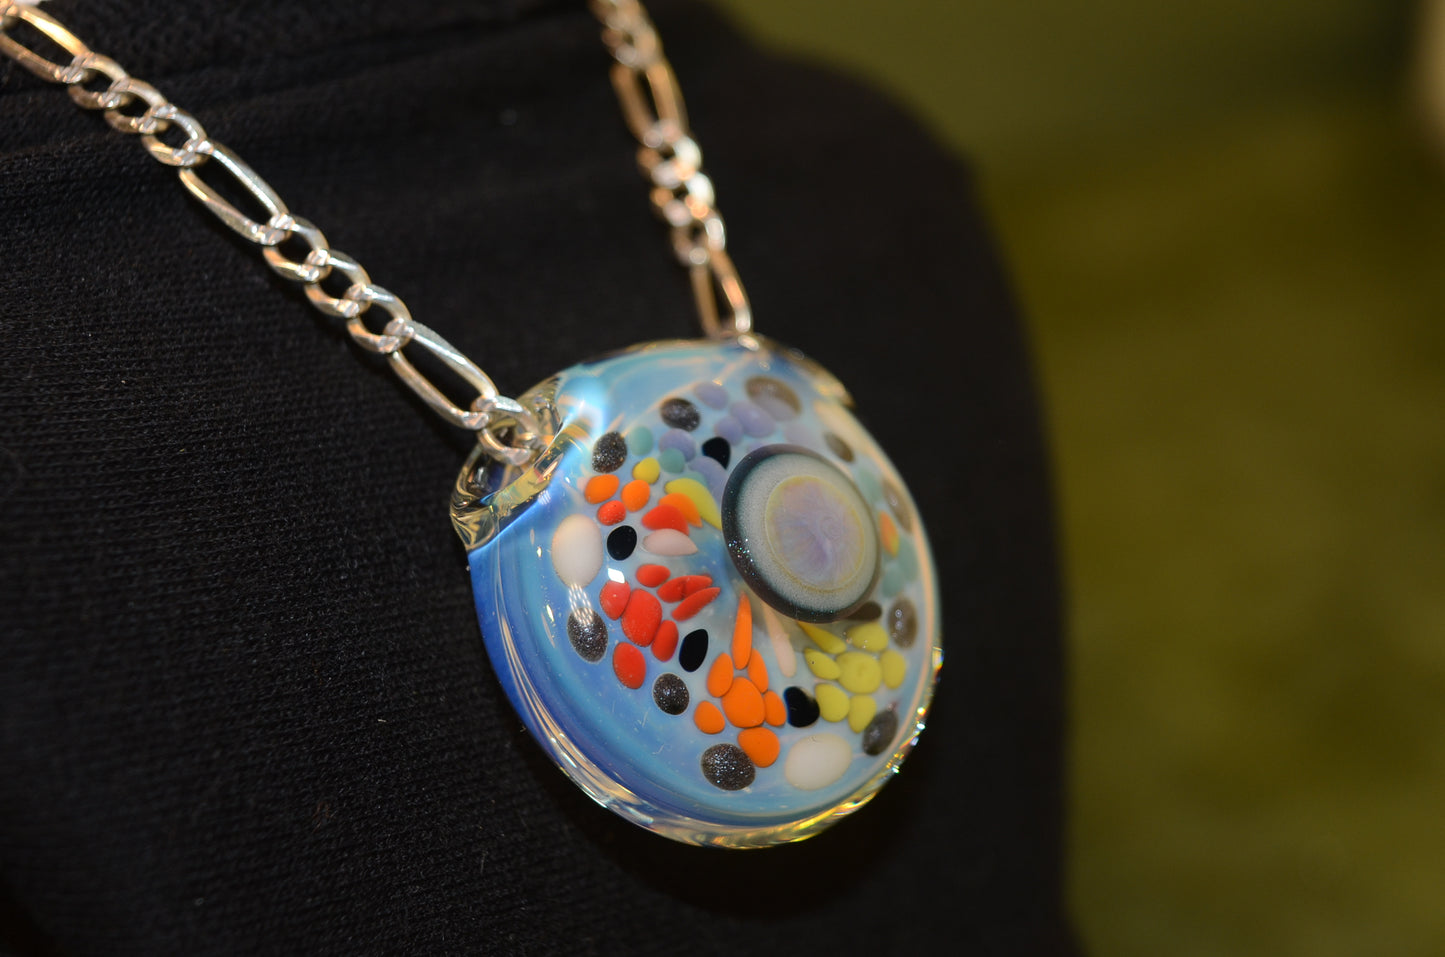 "Odd Man Out" - Inside Out Pendant